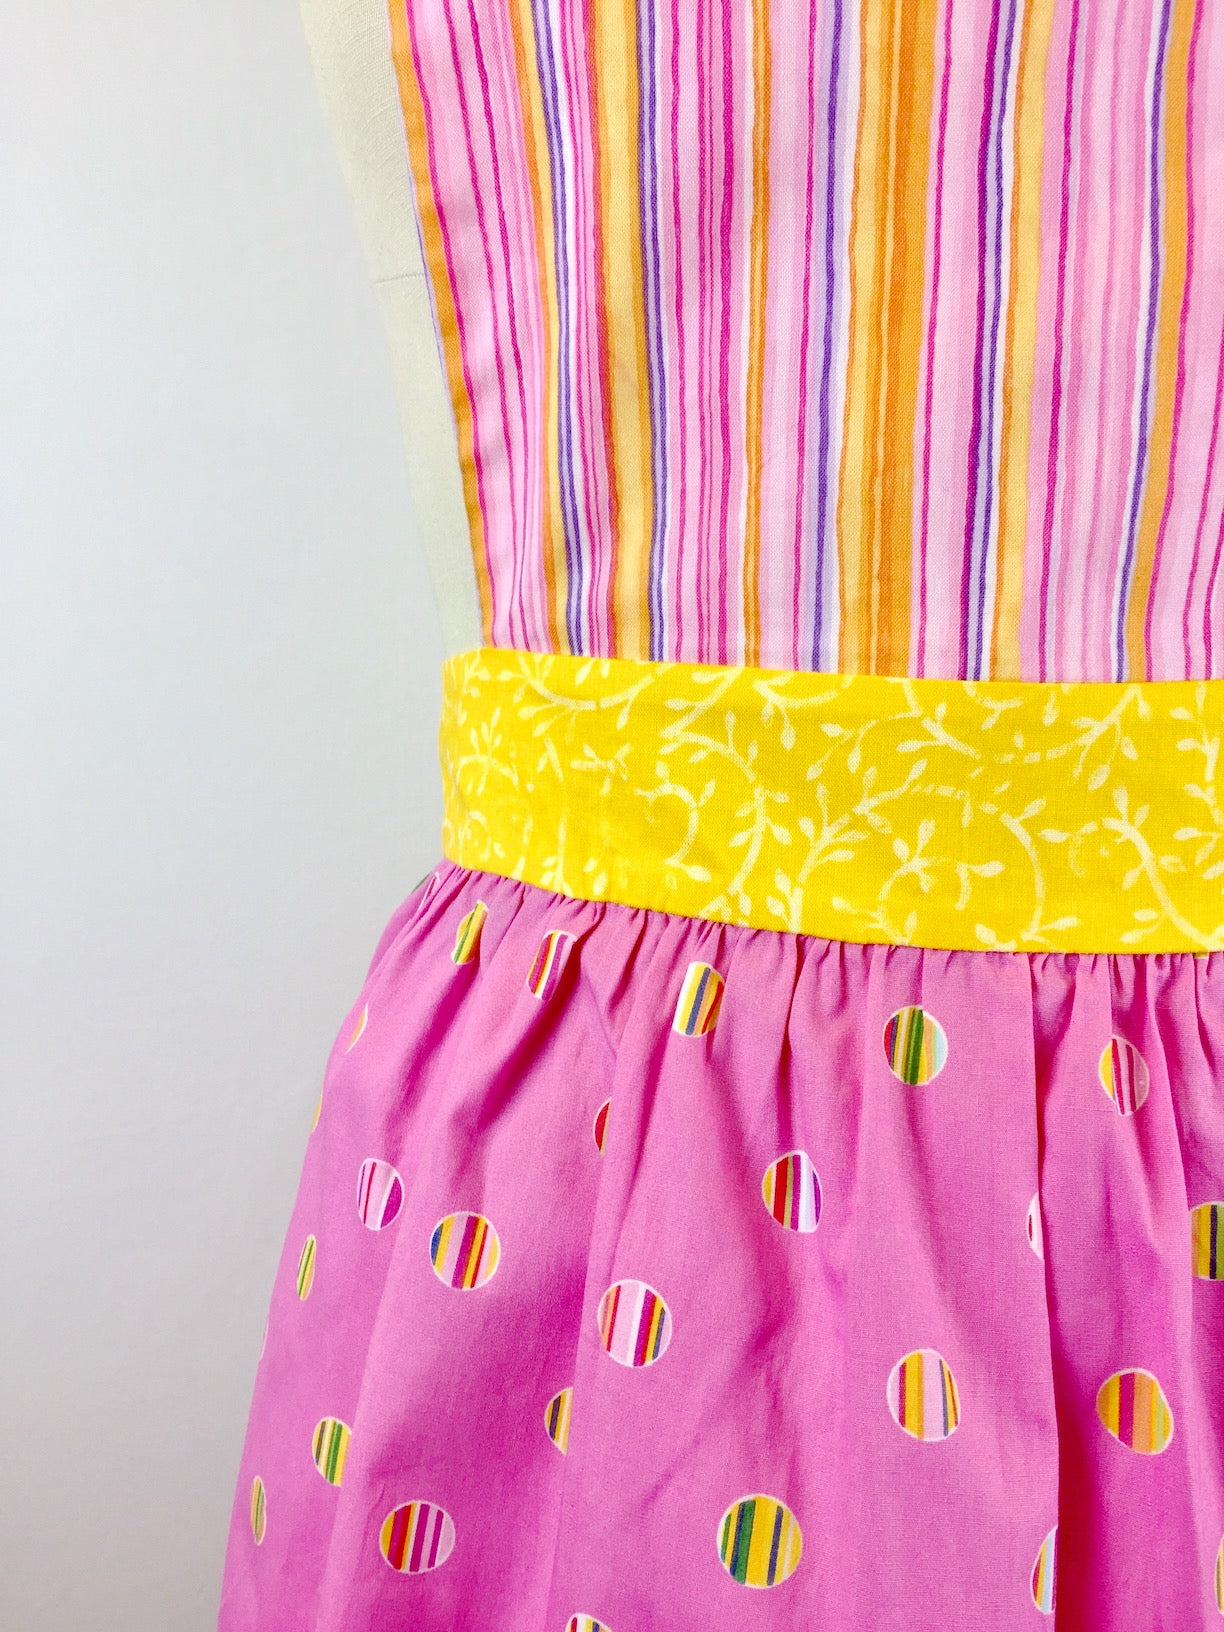 Pretty in Pink Apron-The Blue Peony-Age Group_Adult,Apron Style_Vintage Feminine,Category_Apron,Color_Pink,Color_Yellow,Department_Kitchen,Material_Cotton,Pattern_Polka Dot,Pattern_Stripes